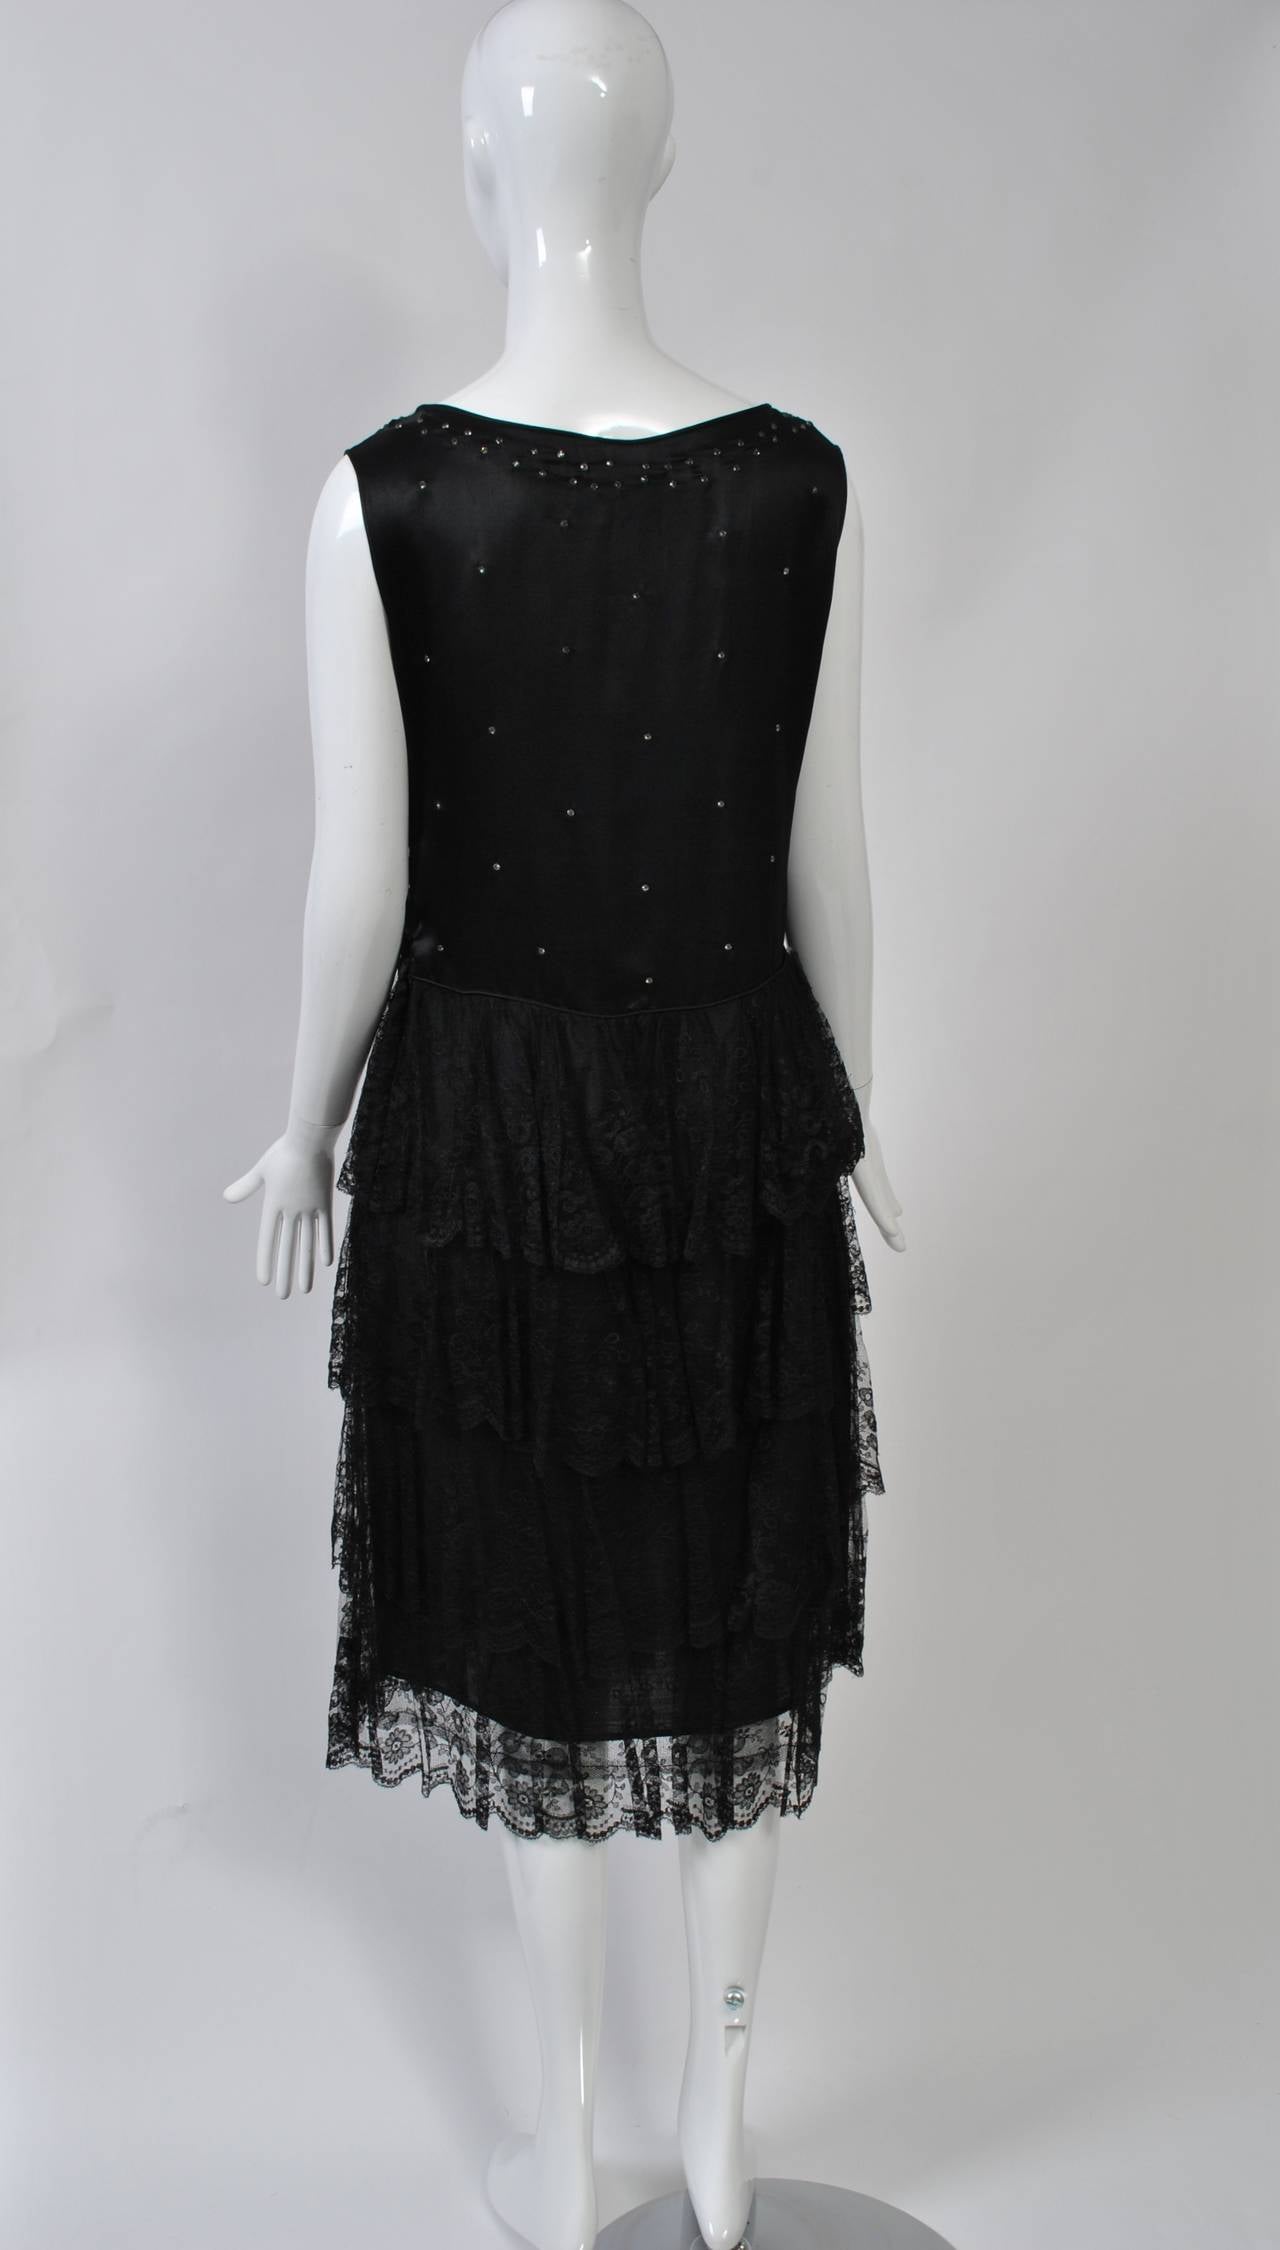 Hard-to-find 1930s cocktail dress in excellent condition with a scoop-neck, sleeveless bodice of black silk charmeuse and a tiered skirt of black lace. The bodice is studded with rhinestones and has a dropped waist that tapers to a V in front. Snaps